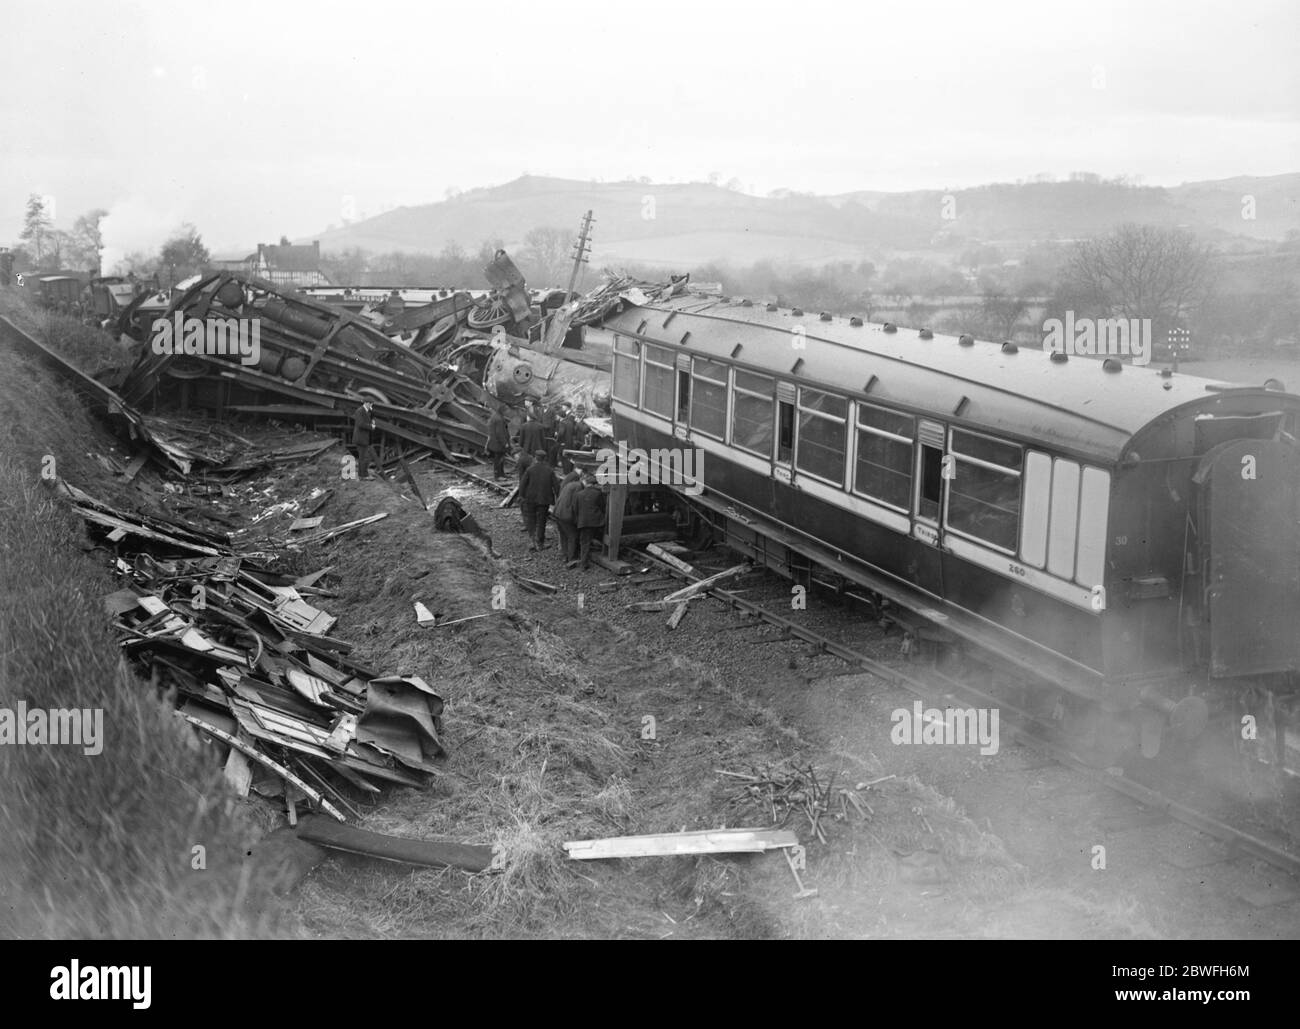 The Welsh express disaster The tangled mass of tragic wreckage which was presented after the wreck on the wreckage was over 27 January 1921 Abermule train collision Stock Photo